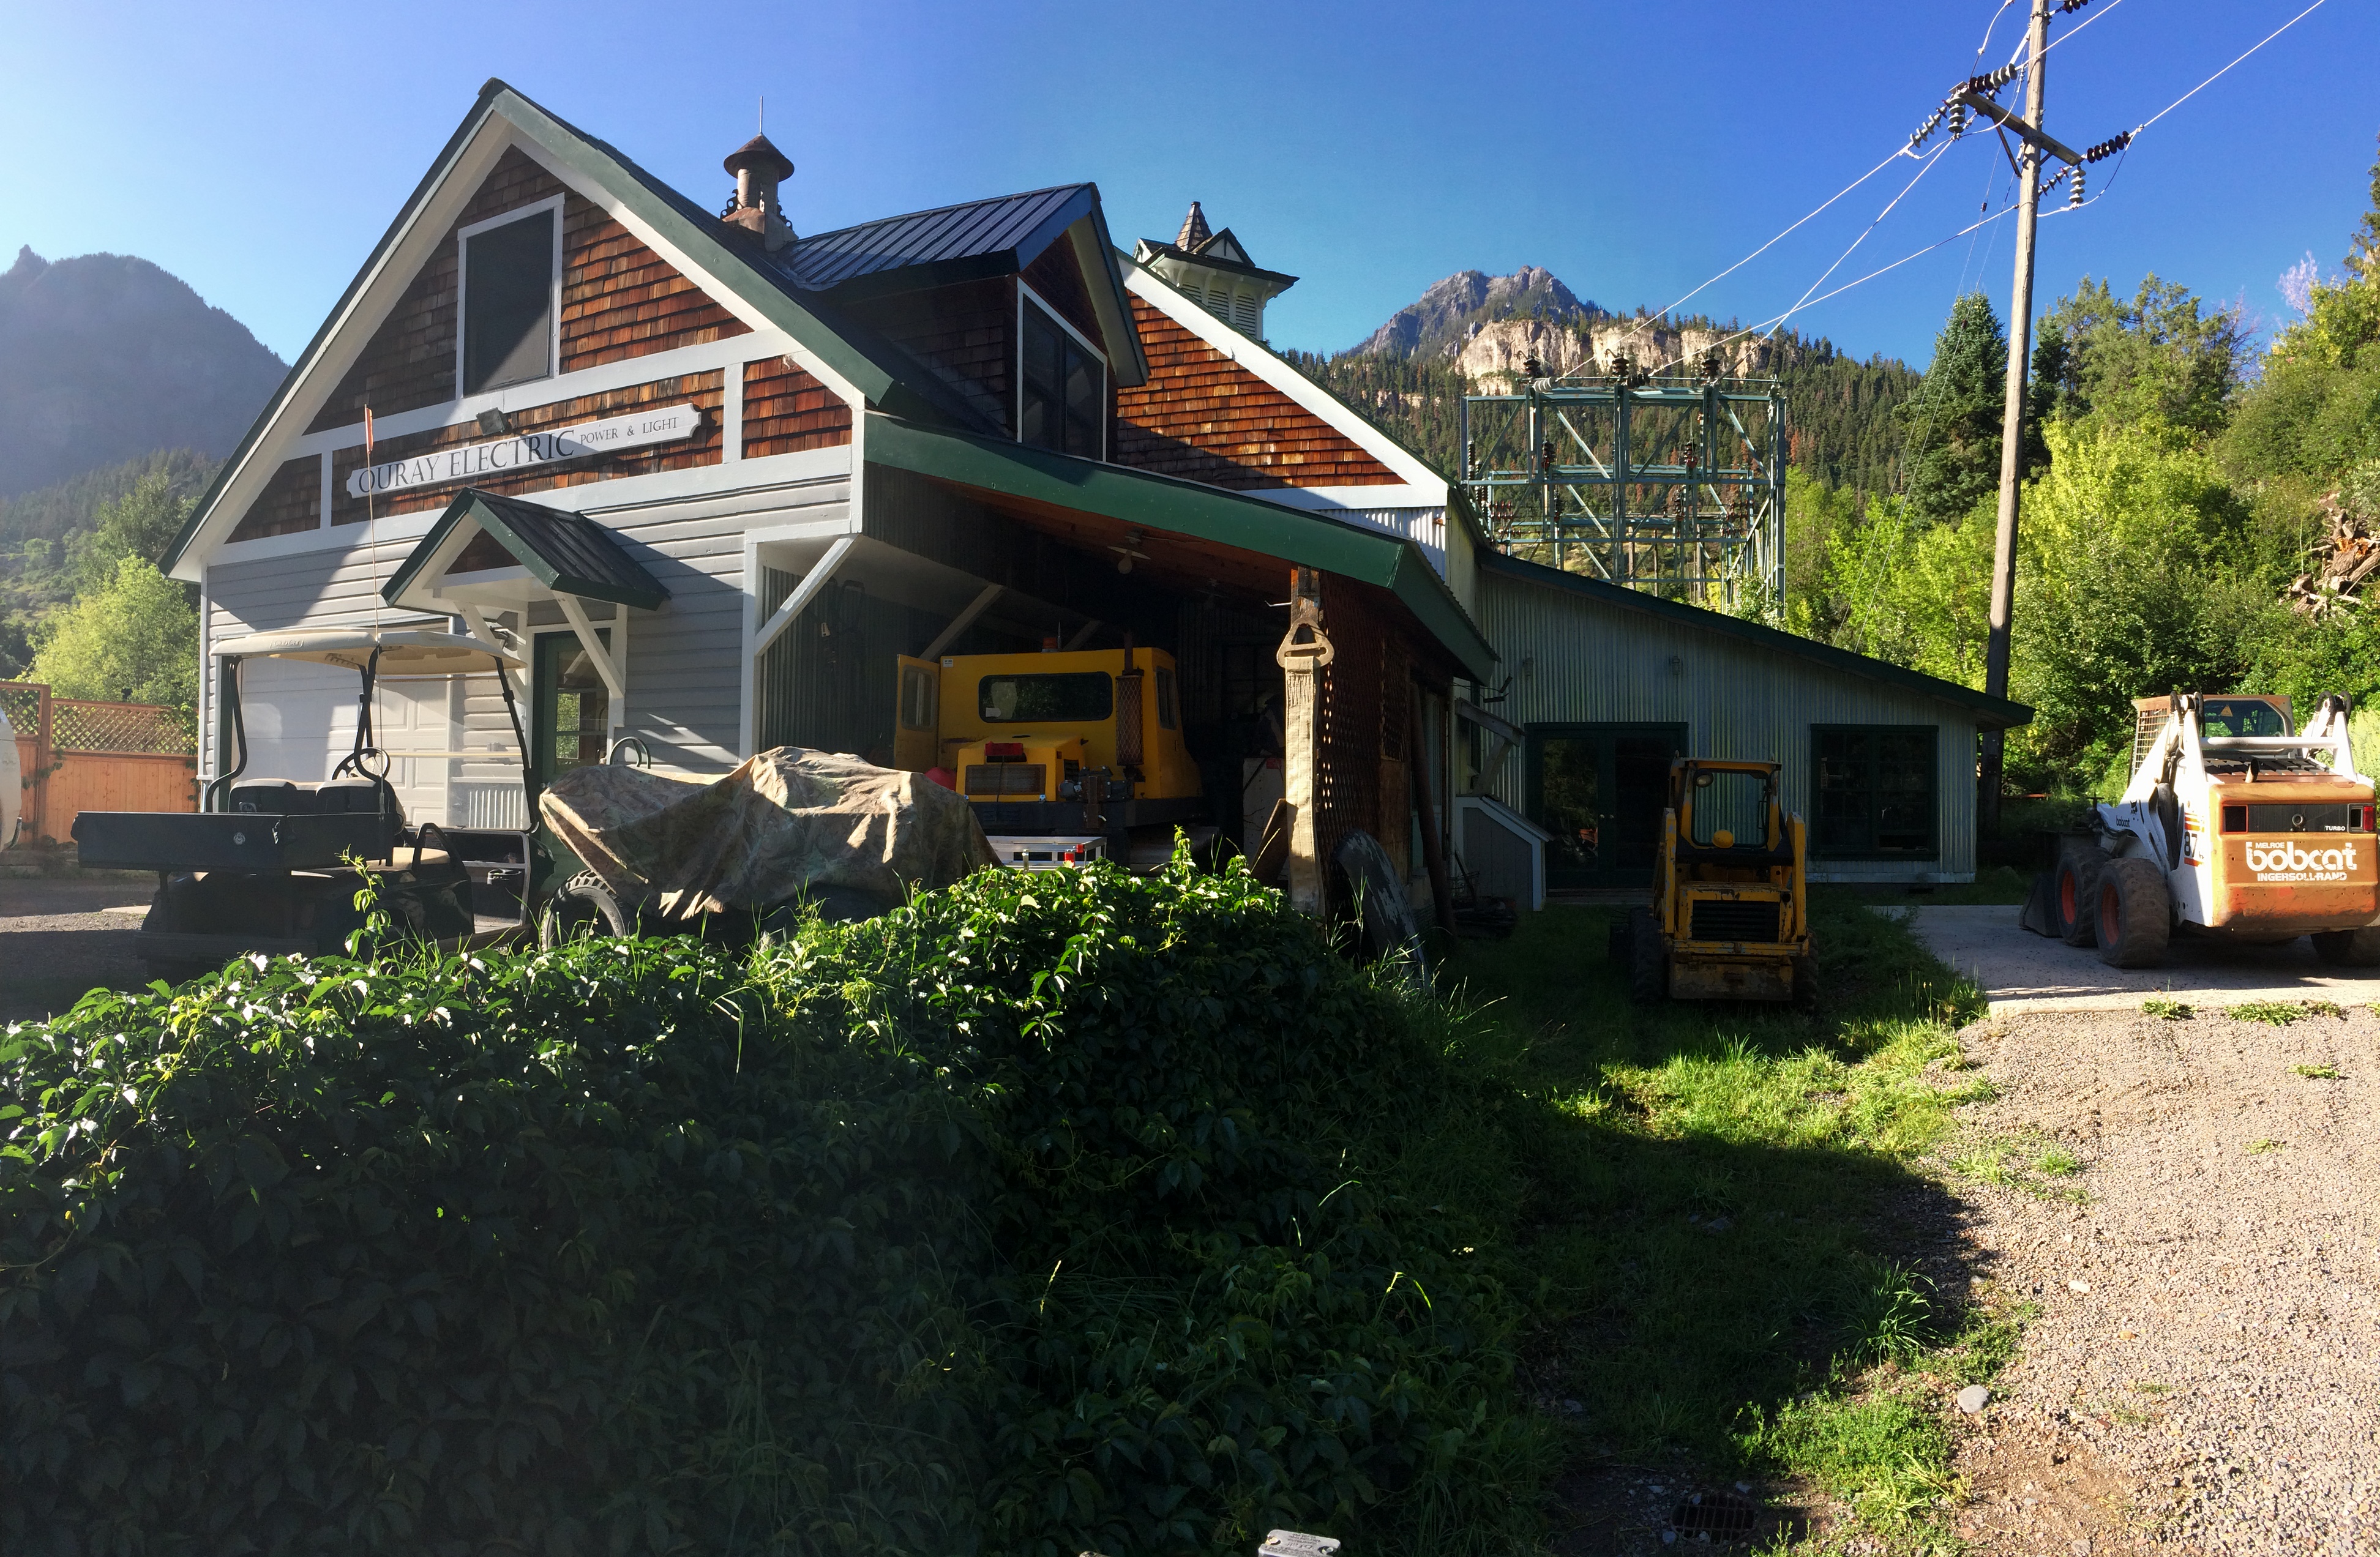 The Ouray Hydroelectric Plant in Ouray